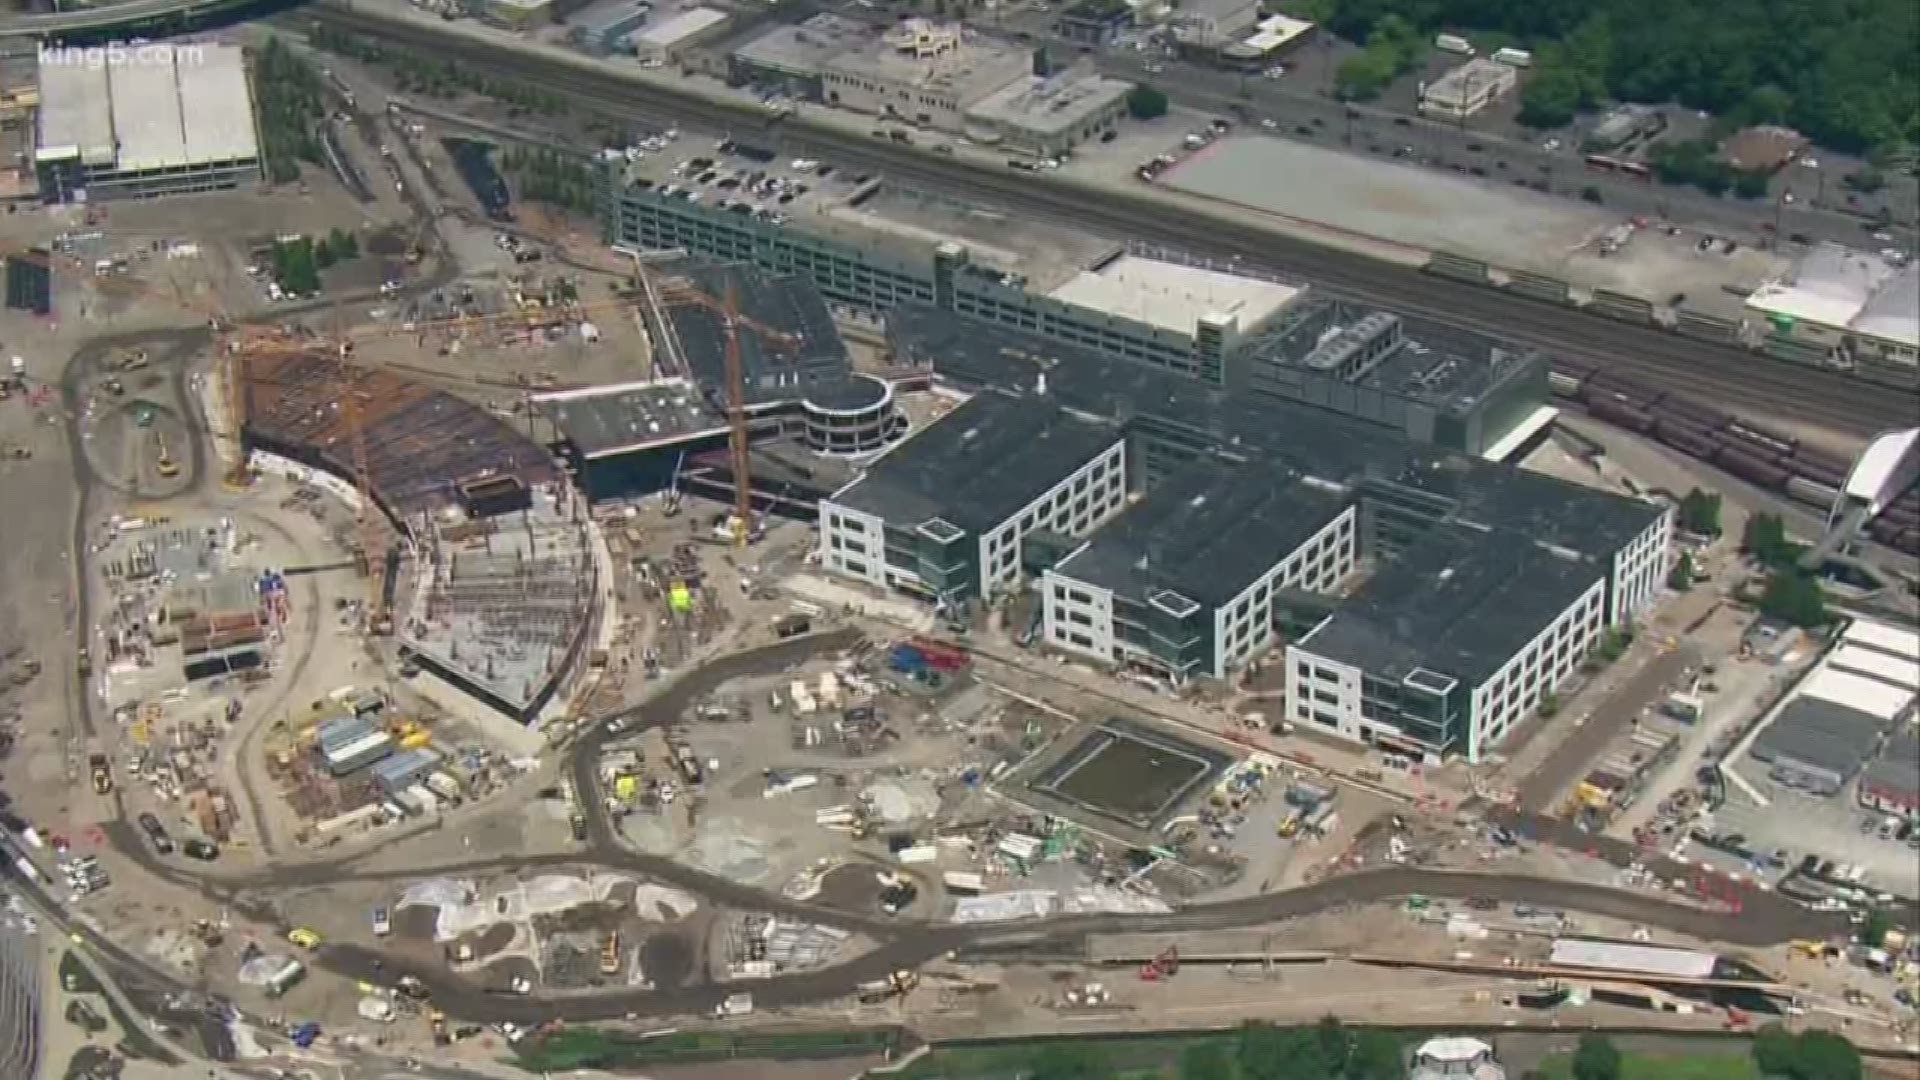 Expedia is preparing to move thousands of workers to its sprawling, new waterfront campus in Seattle’s Interbay neighborhood. Mayor Jenny Durkan toured the new campus on Wednesday and addressed some of the transportation concerns. KING 5's Ted Land reports.